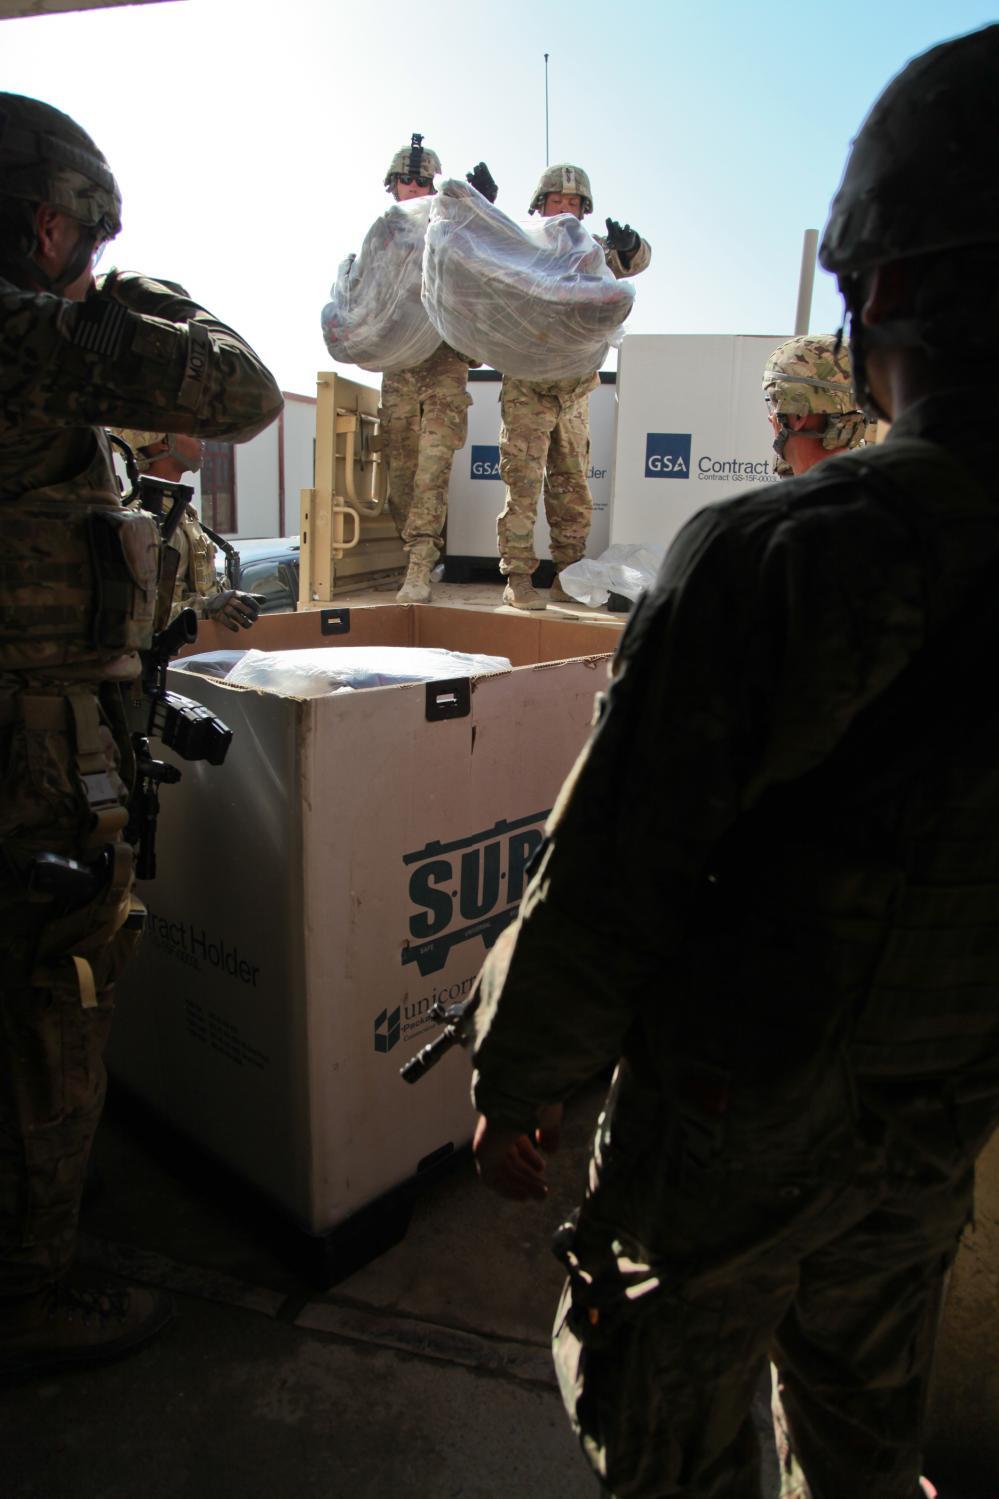 U.S. Soldiers serving with Provincial Reconstruction Team (PRT) Khost unload blankets off of a light medium tactical vehicle during a humanitarian aid mission at the Khost